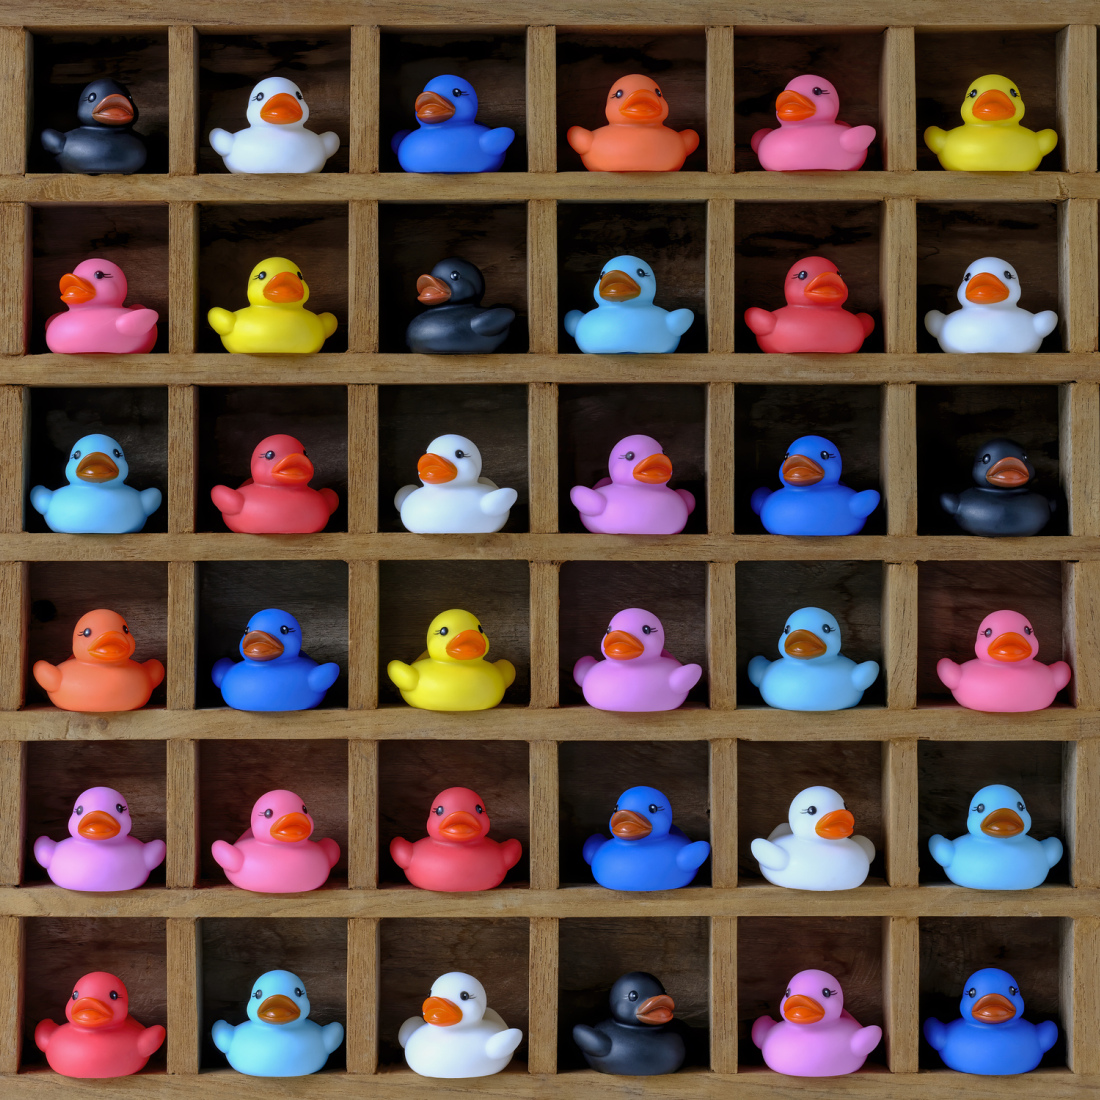 A grid of organized rubber ducks in all different, bright colors.